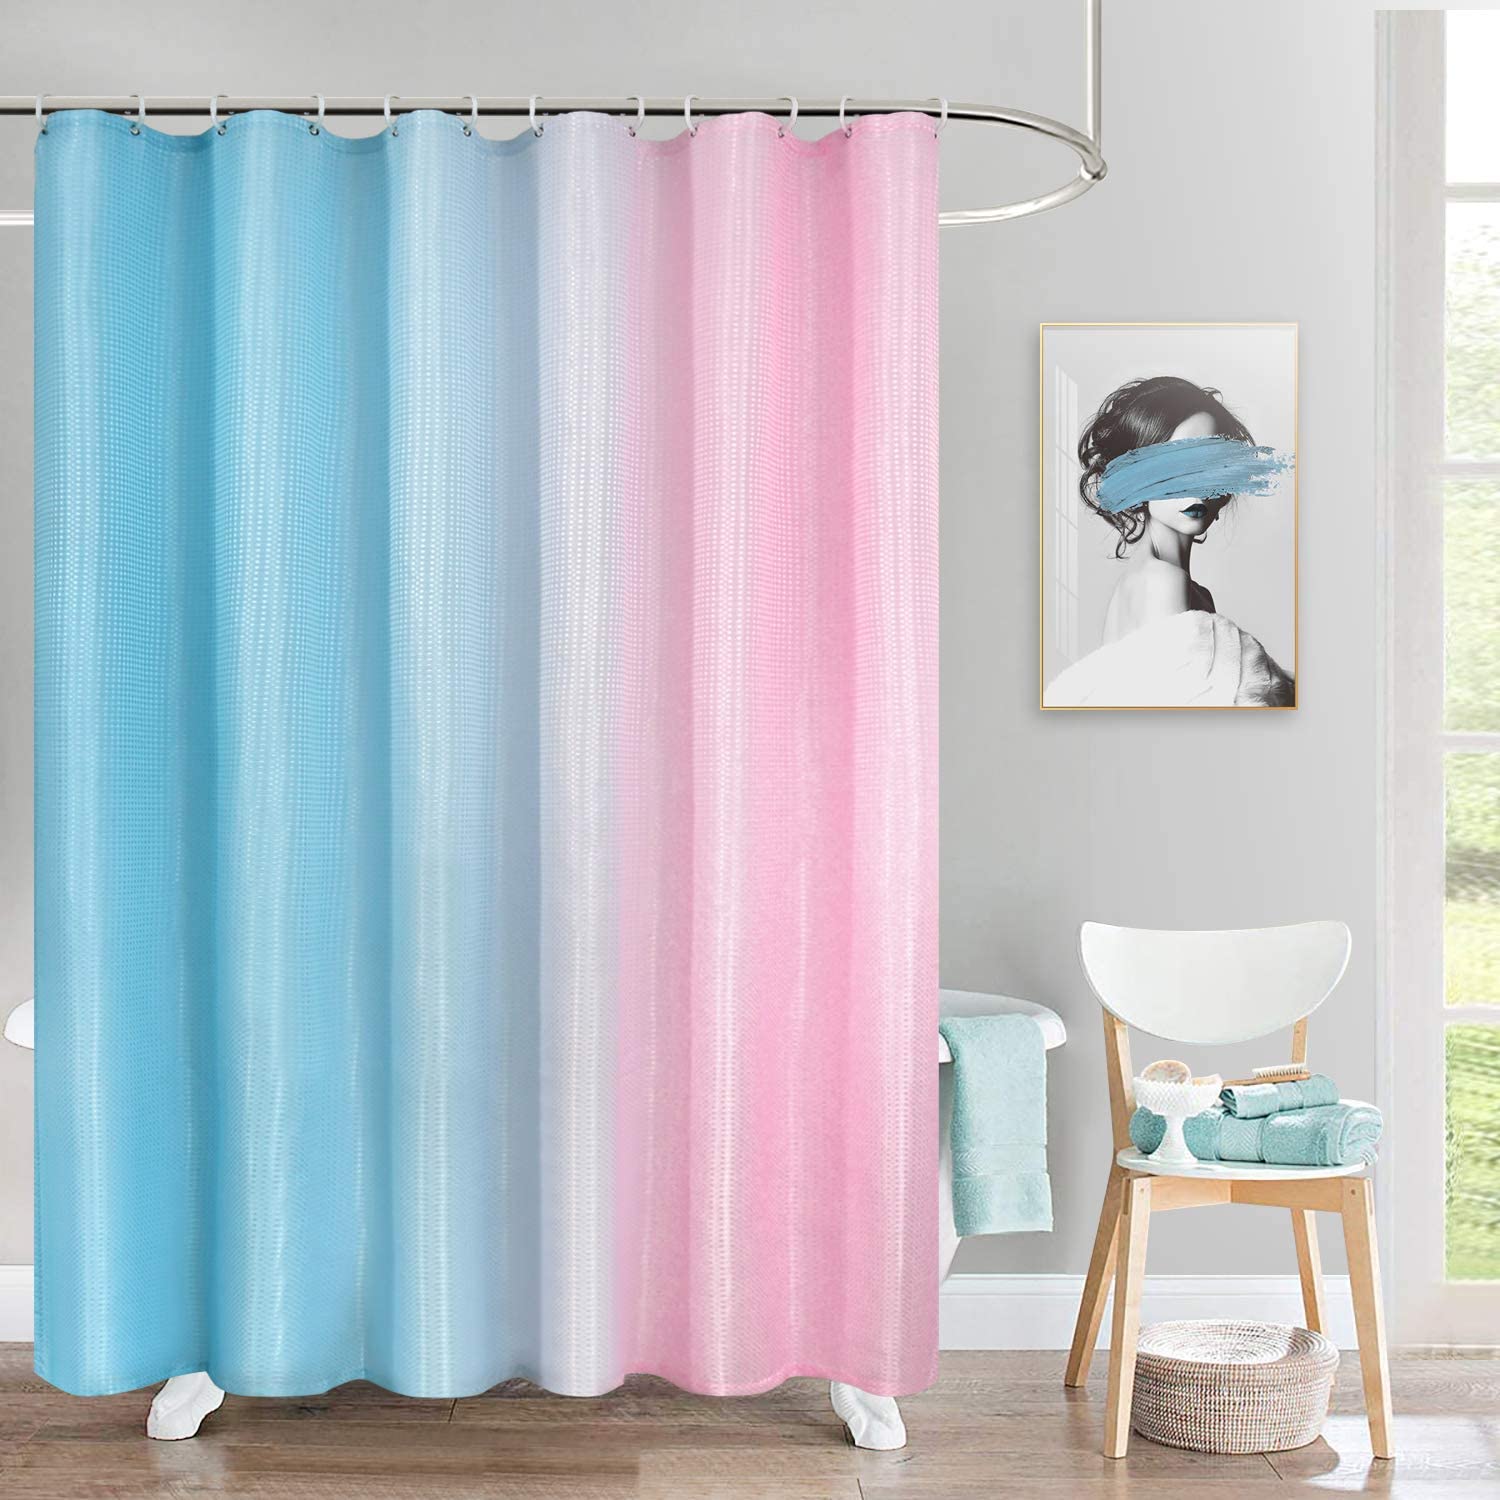 Details about   BGment Fabric Ombre Shower Curtain Sets with 12 Hooks for Bathroom Waffle Weave 